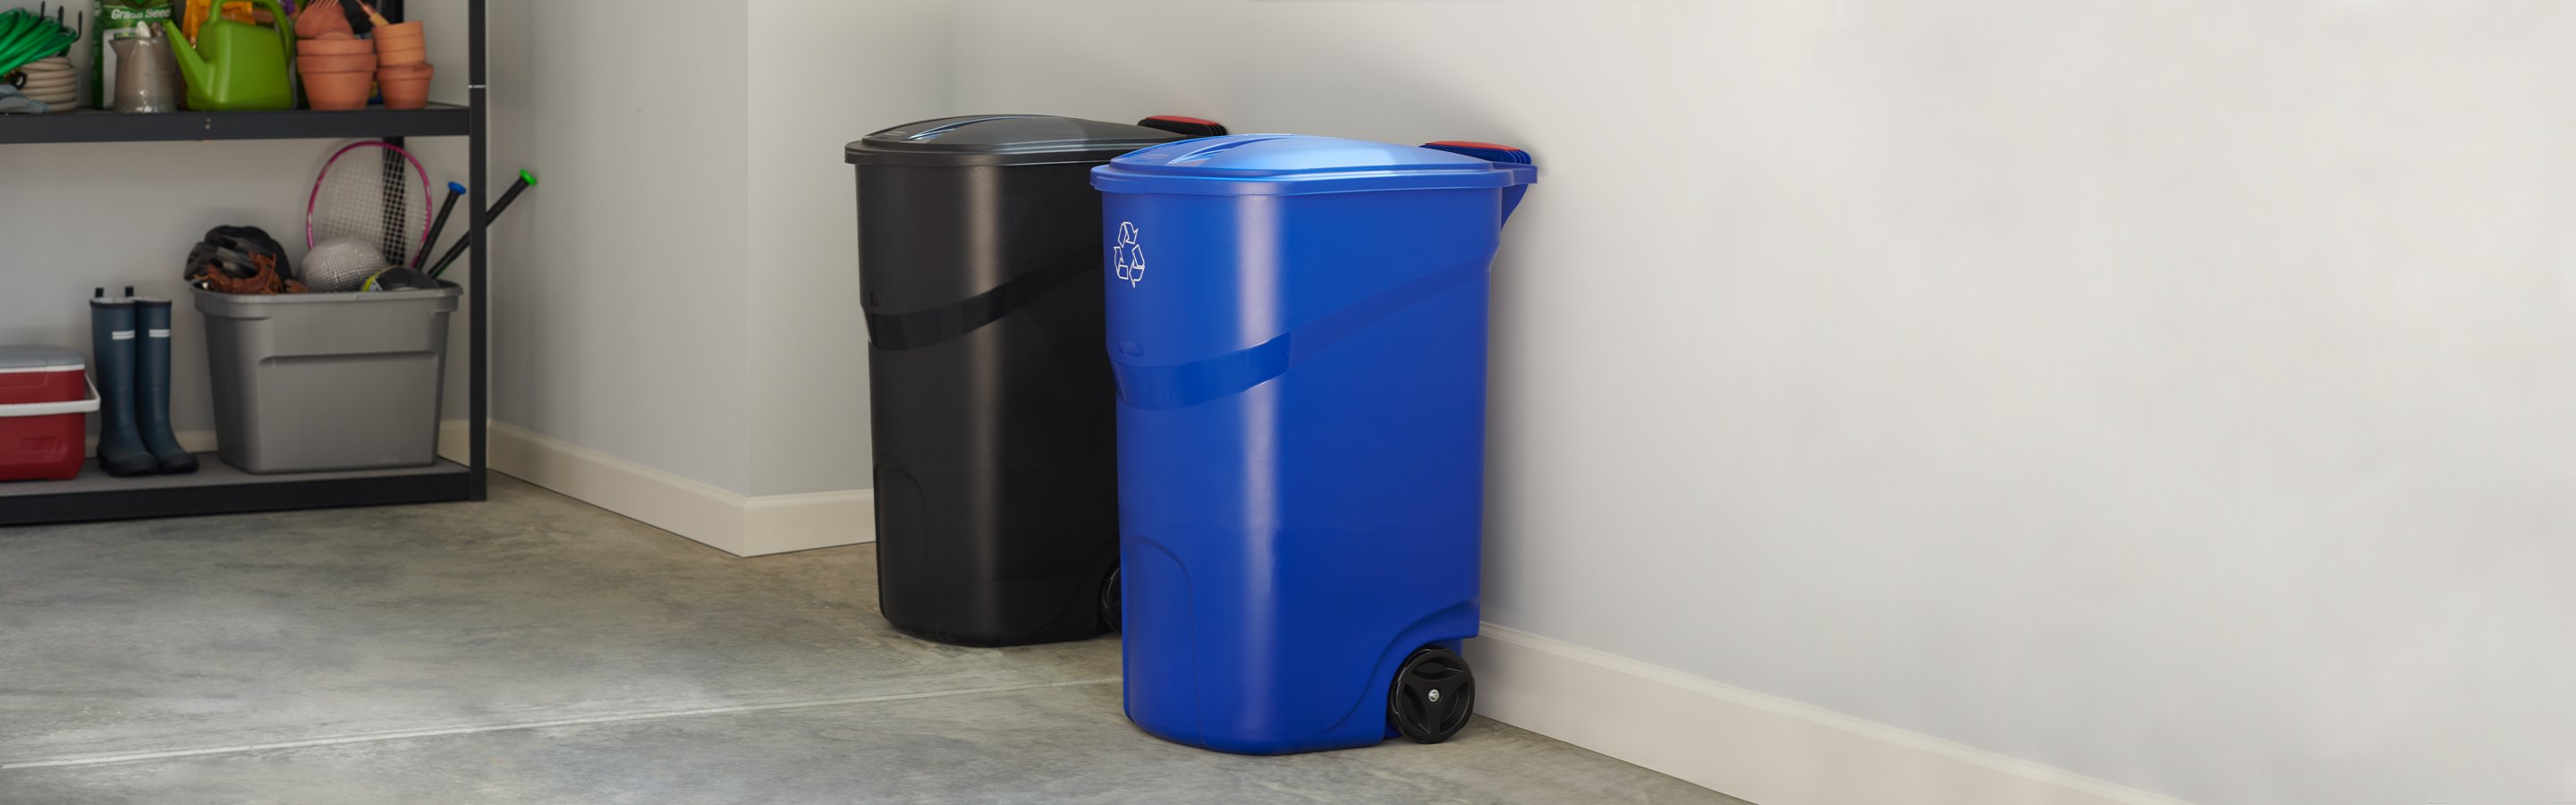 garbage and recycling can in garage